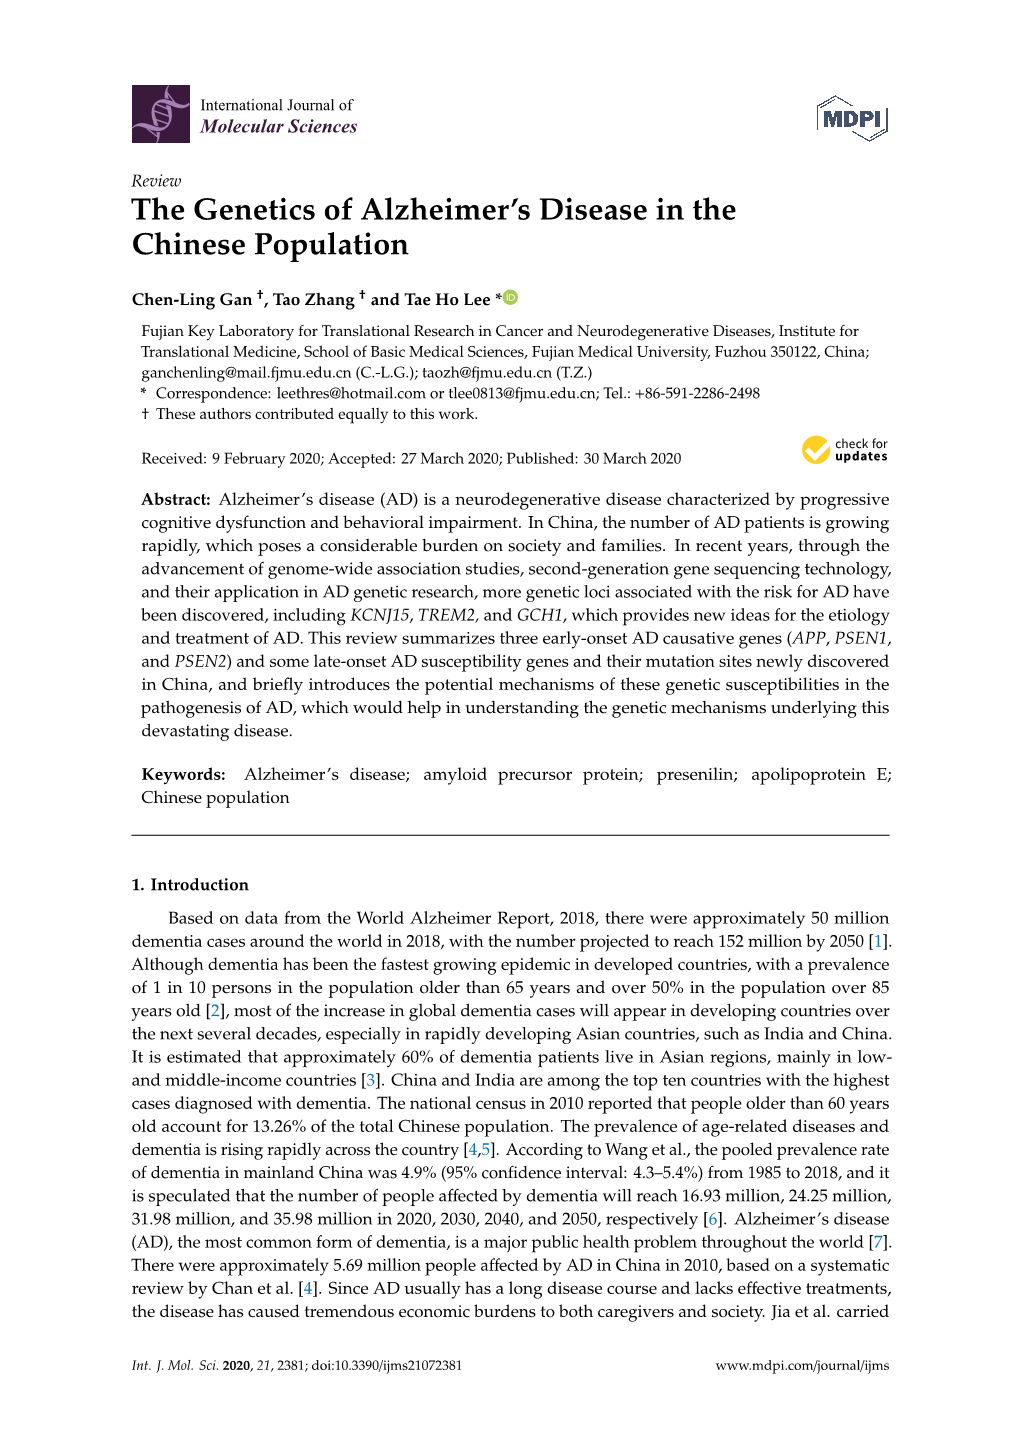 The Genetics of Alzheimer's Disease in the Chinese Population